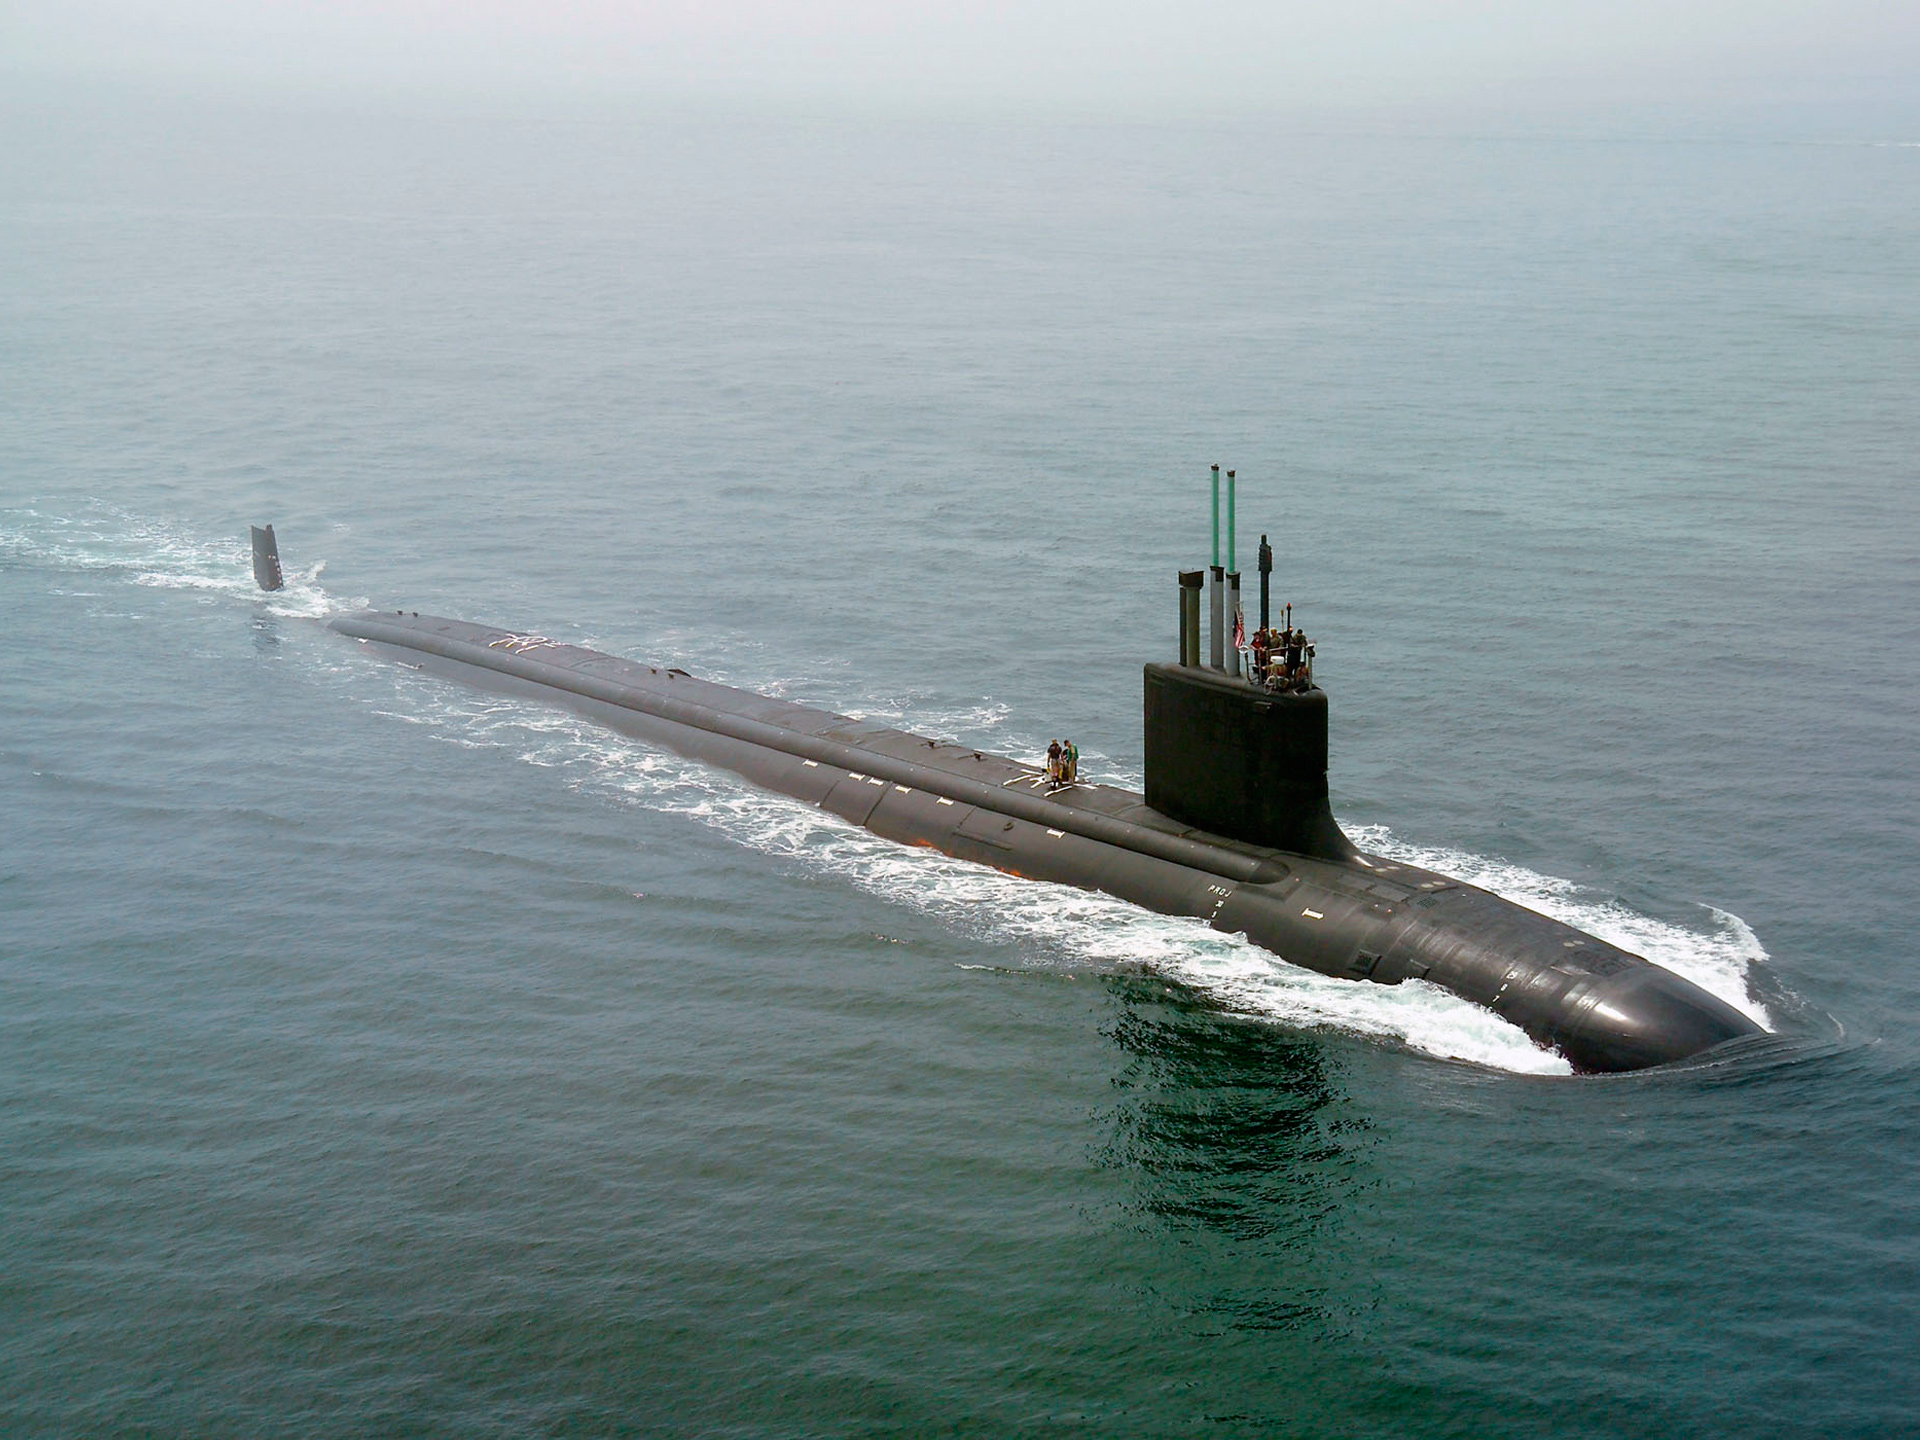 Free Wallpaper Wallpapers US Navy Submarines PicuresMilitary Nuclear